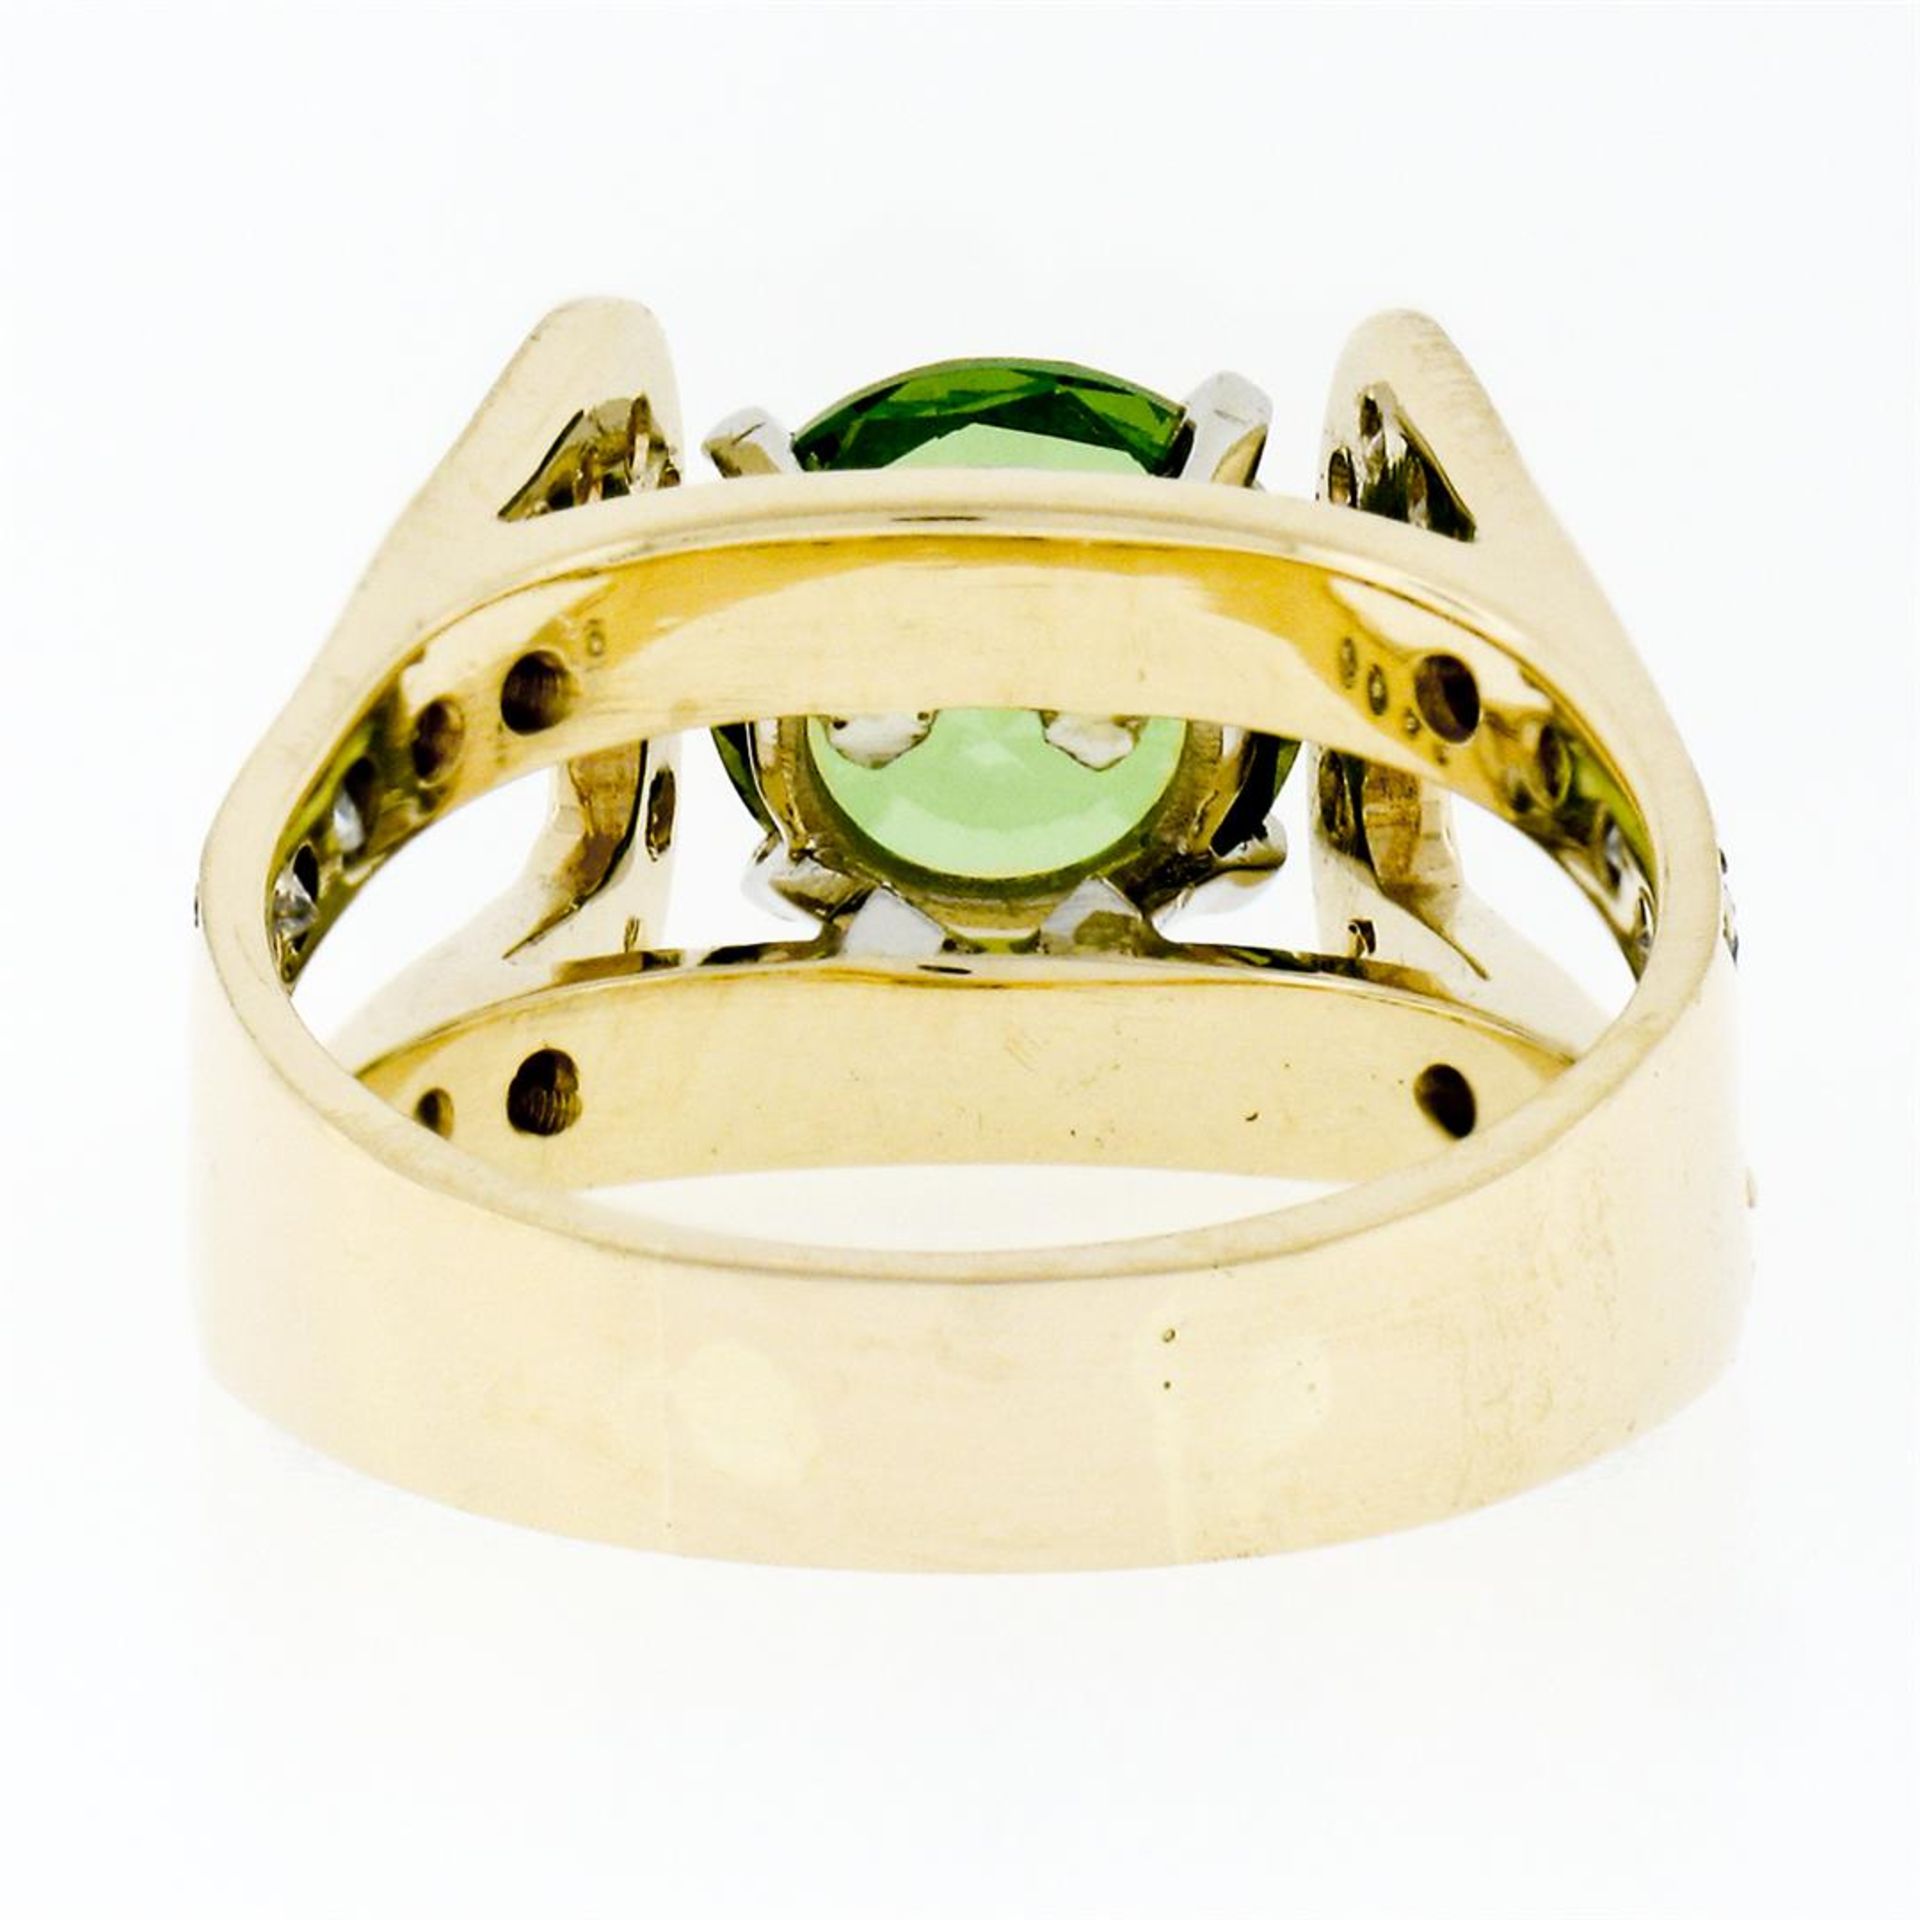 14k Yellow Gold 3.0ctw Round Peridot Solitaire & Ideal Cut Diamond Cocktail Ring - Image 9 of 9